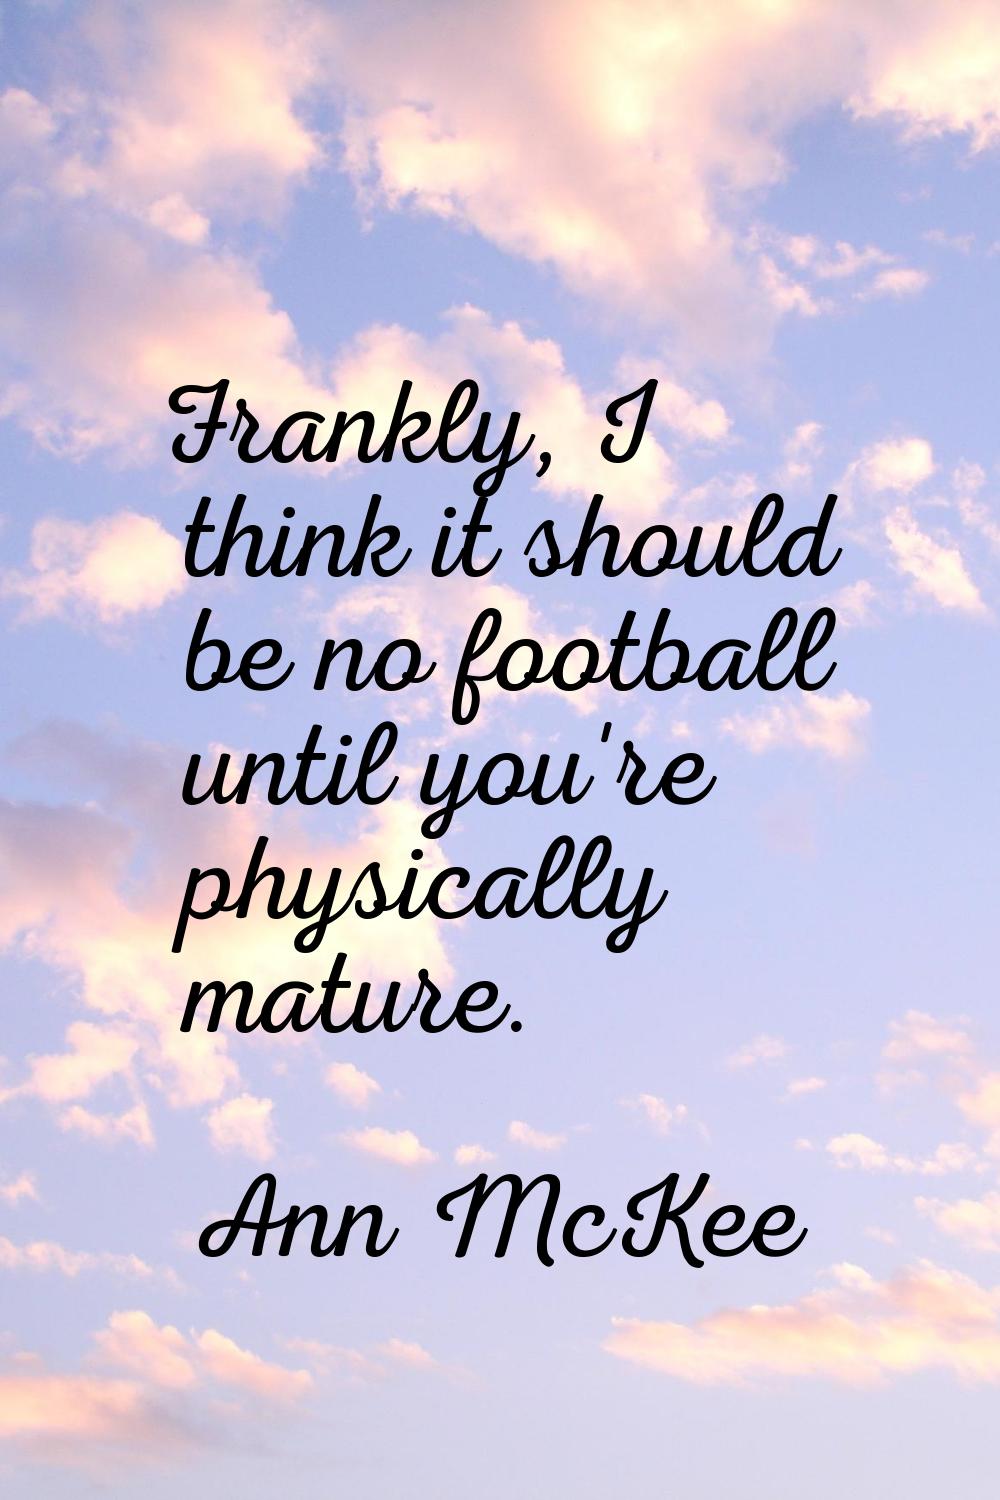 Frankly, I think it should be no football until you're physically mature.